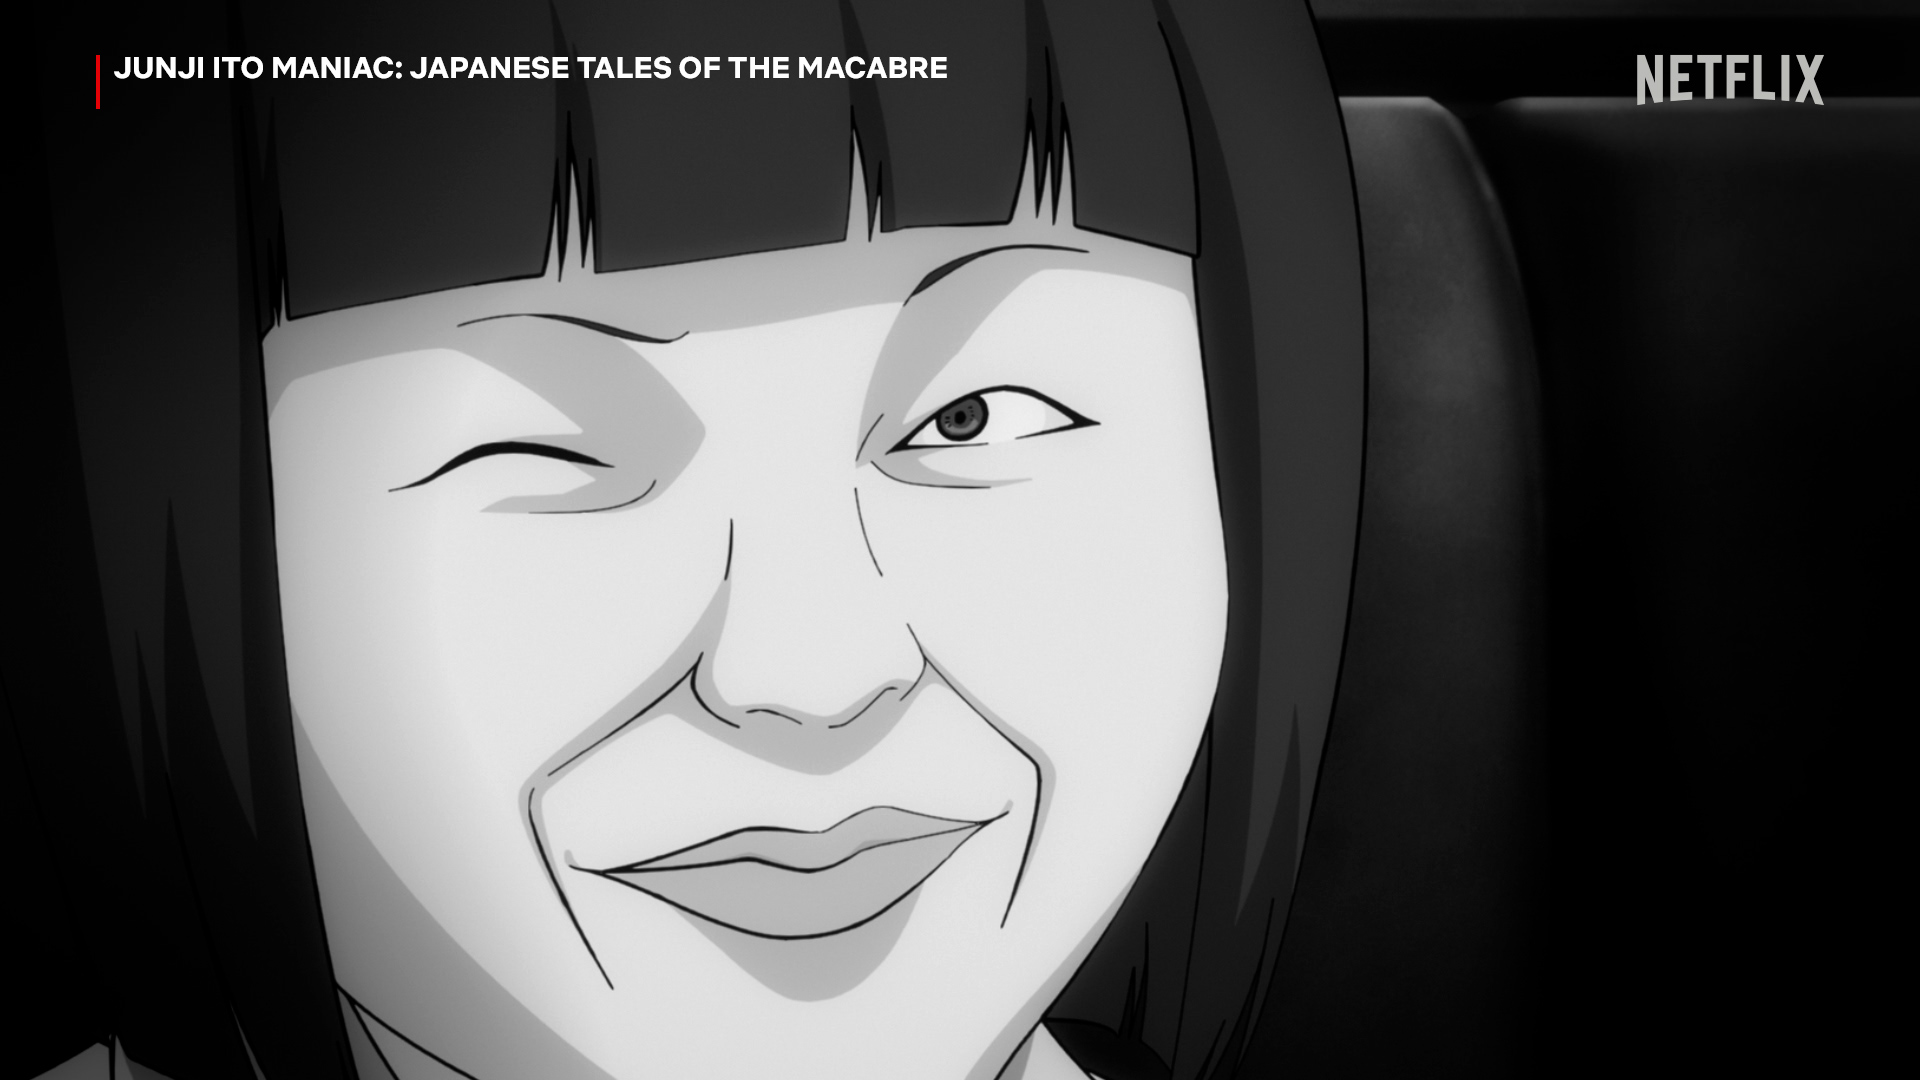 Log Line - Art of Junji Ito Maniac: Japanese Tales of the Macabre